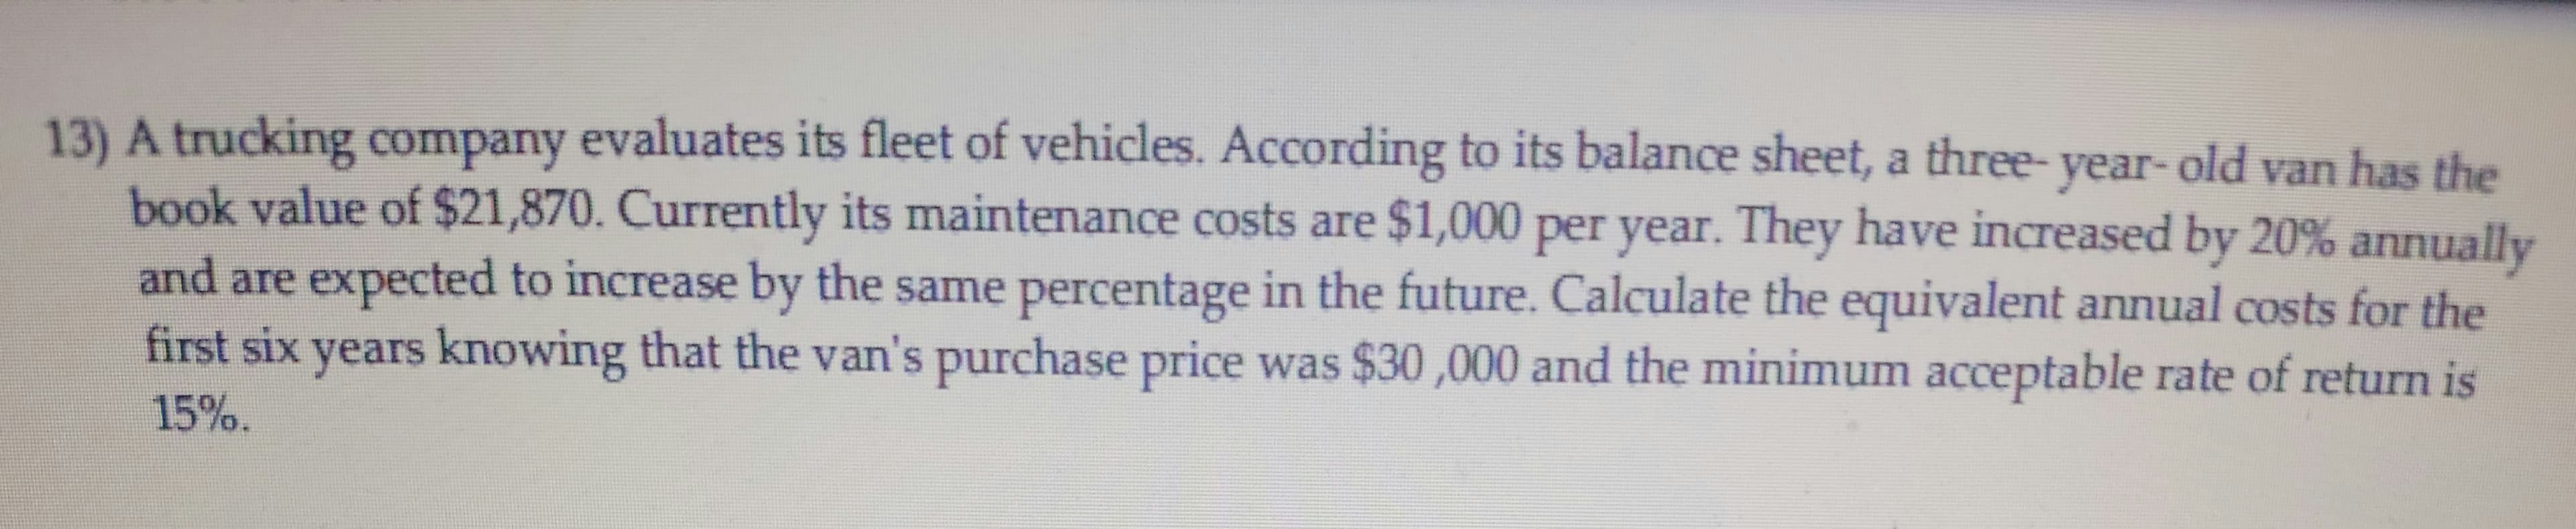 13) A trucking company evaluates its fleet of vehicles. According to its balance sheet, a three- van has the
book value of $21,870. Currently its maintenance costs are $1,000 per year. They have increased by 20% annually
year-old
and are expected to increase by the same percentage in the future. Calculate the equivalent annual costs for the
first six years knowing that the van's purchase price was $30,000 and the minimum acceptable rate of return is
15%.
